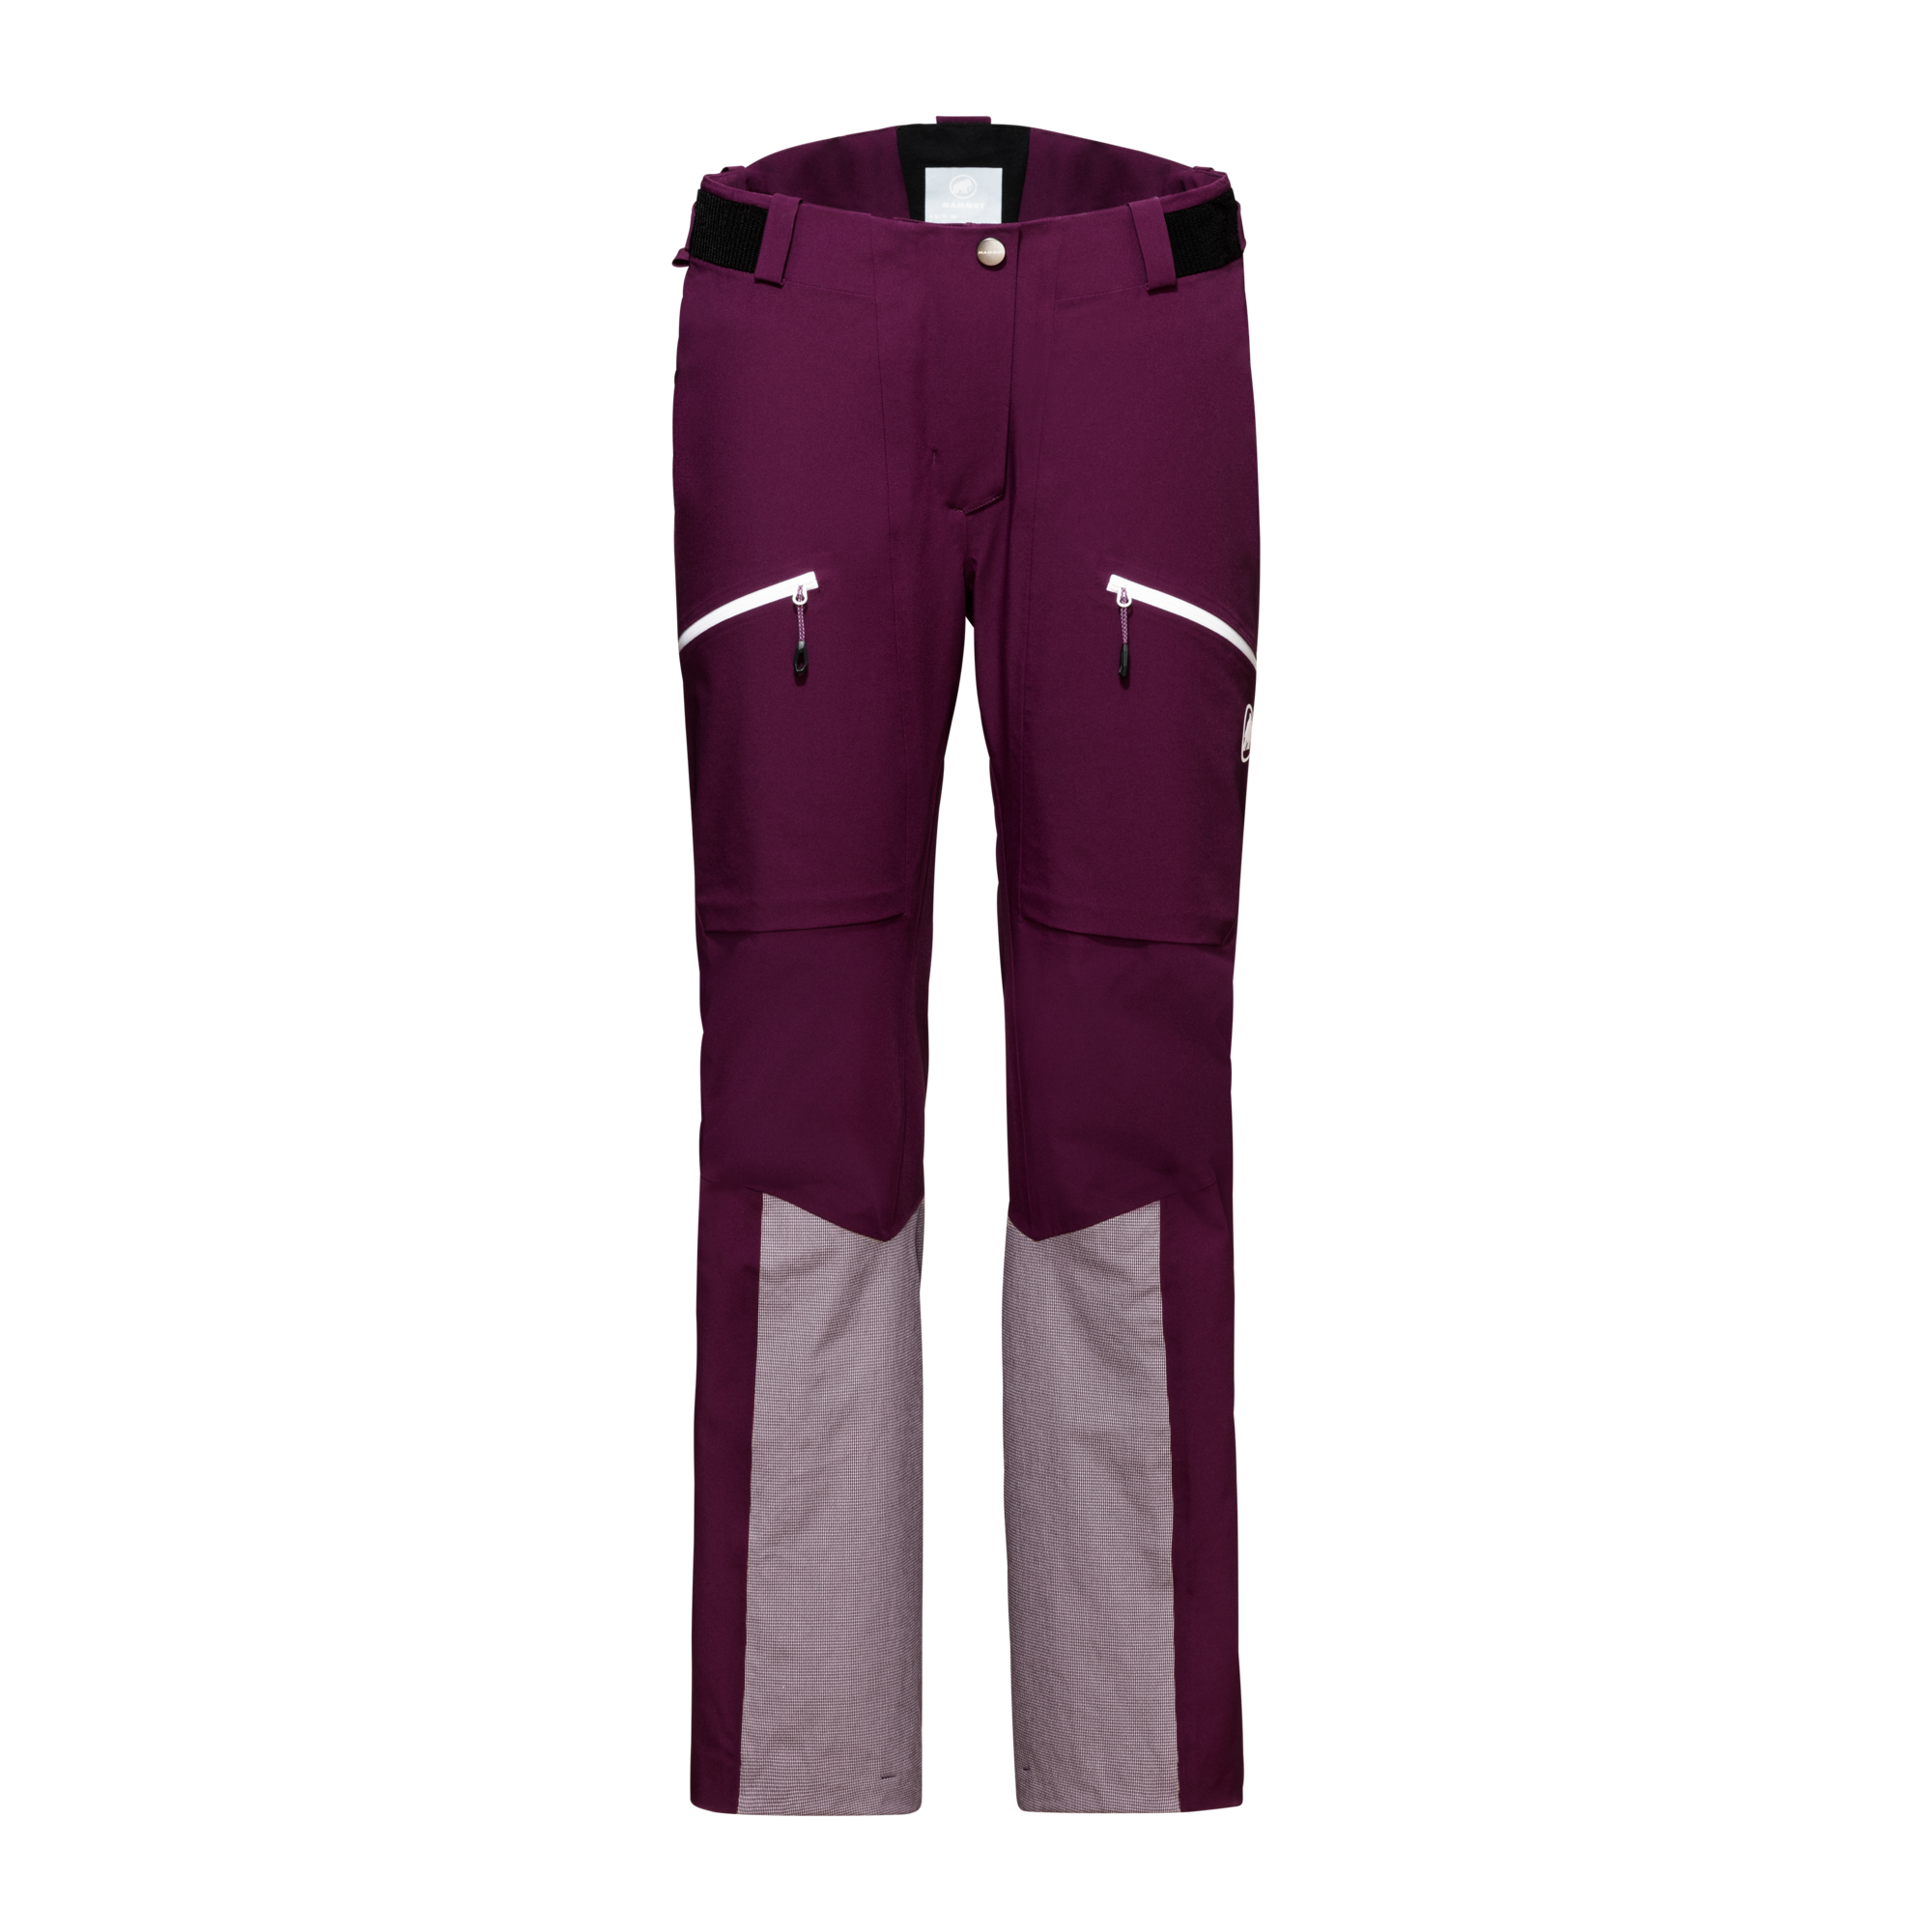 Women's Tour Softshell Pants Antracithe, Buy Women's Tour Softshell Pants  Antracithe here